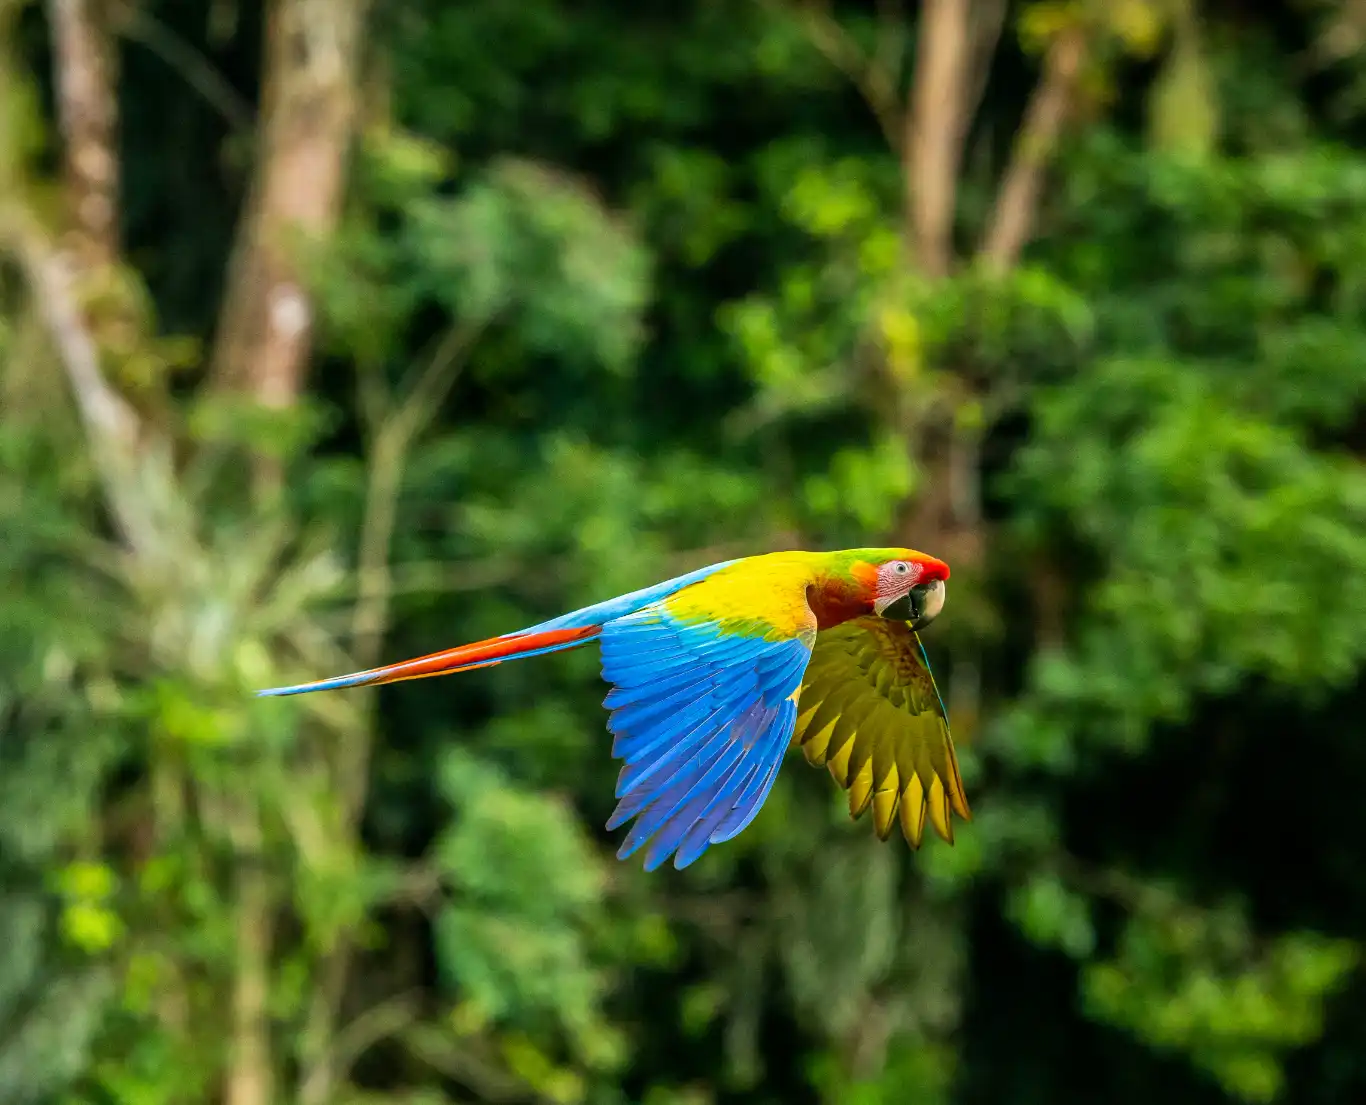 Colorful scarlet macaw flying against a dense green forest backdrop